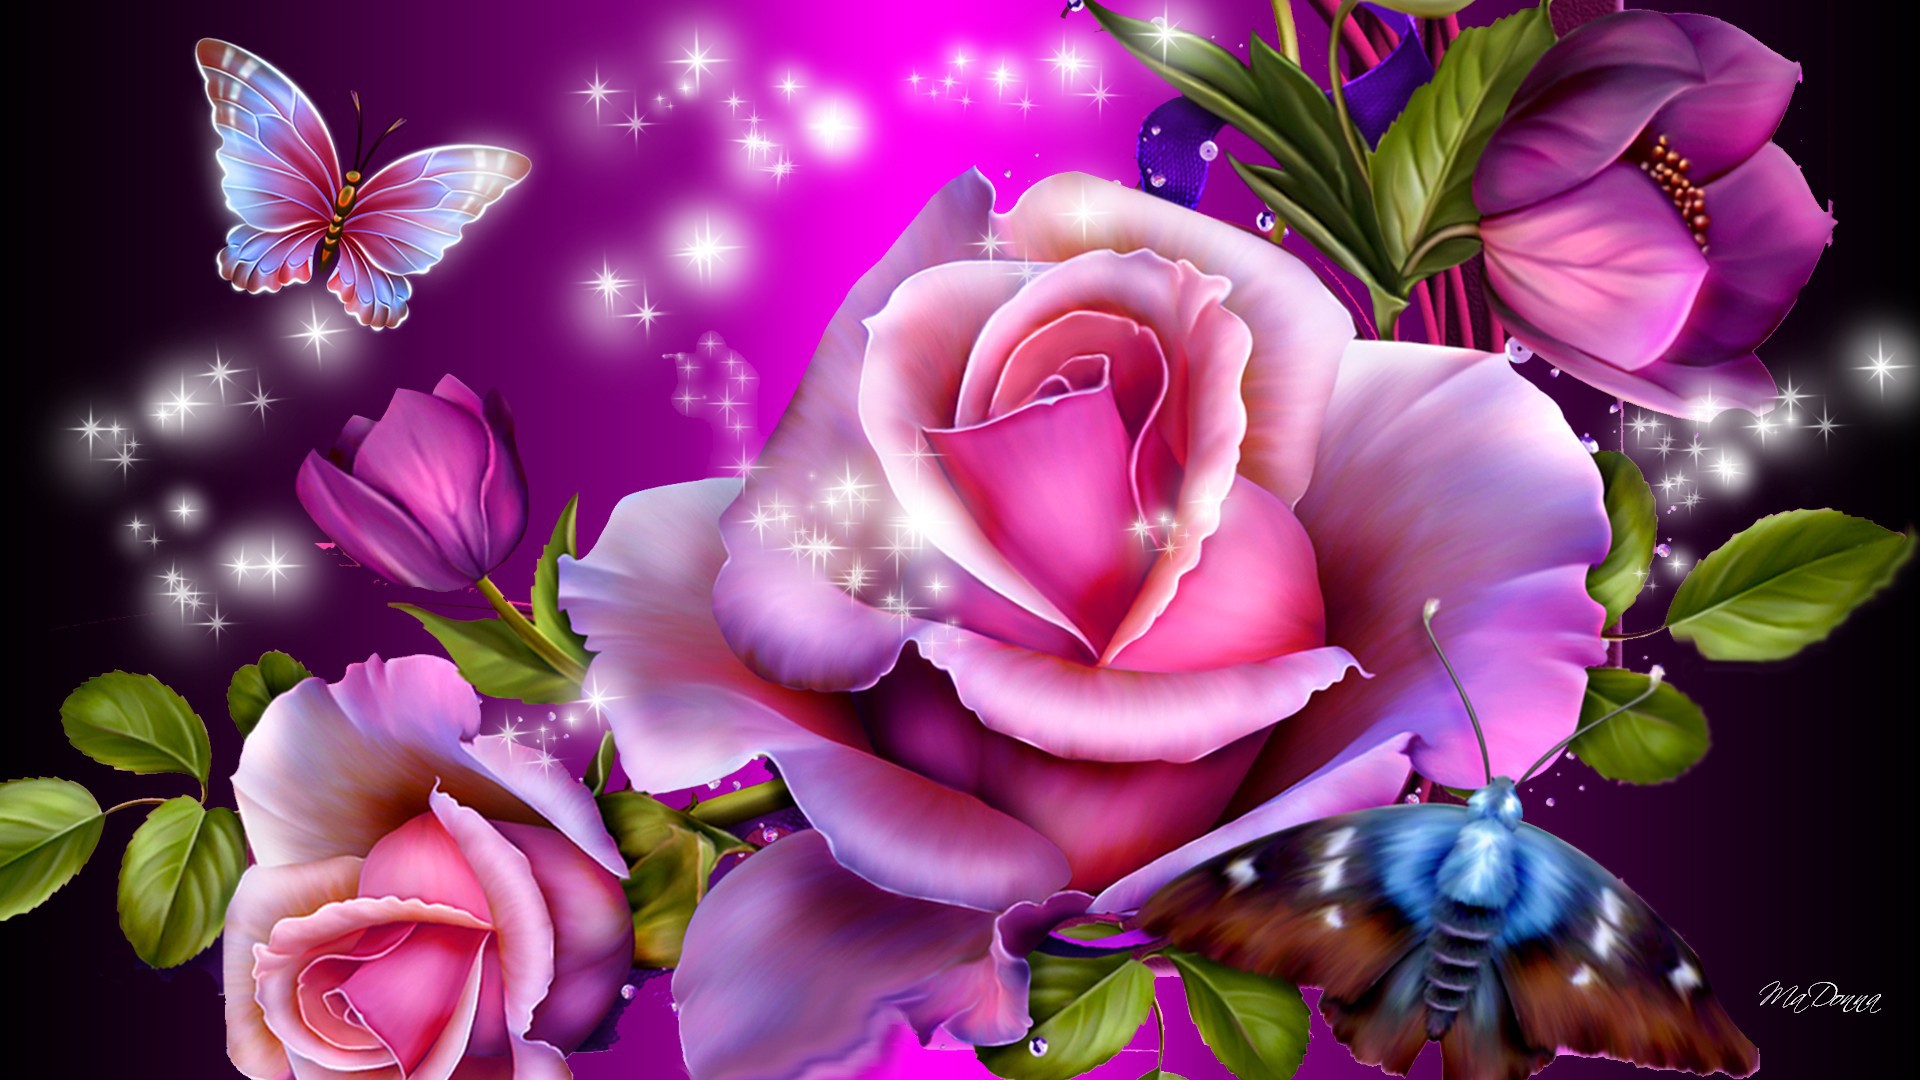 Purple Roses And Butterflies Wallpaper Image